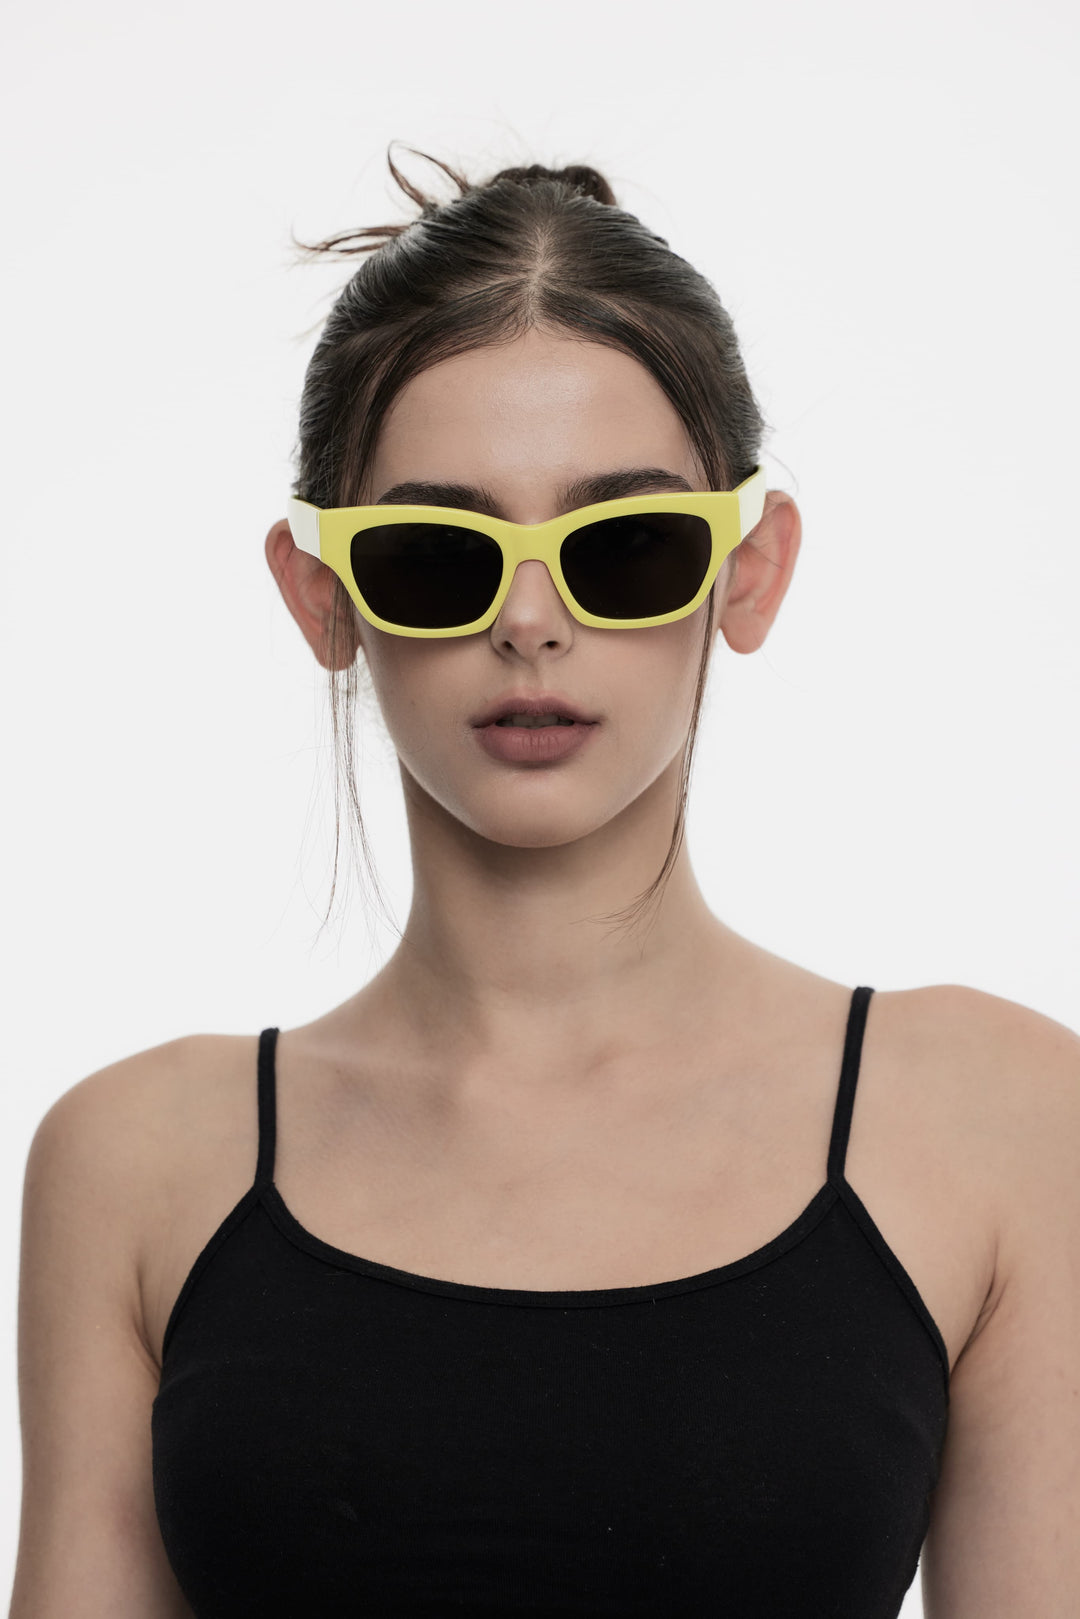 Female Model of her front face wearing Muse in pink yellow stylish sunglasses from Mercury Retrograde Daydream Collection 